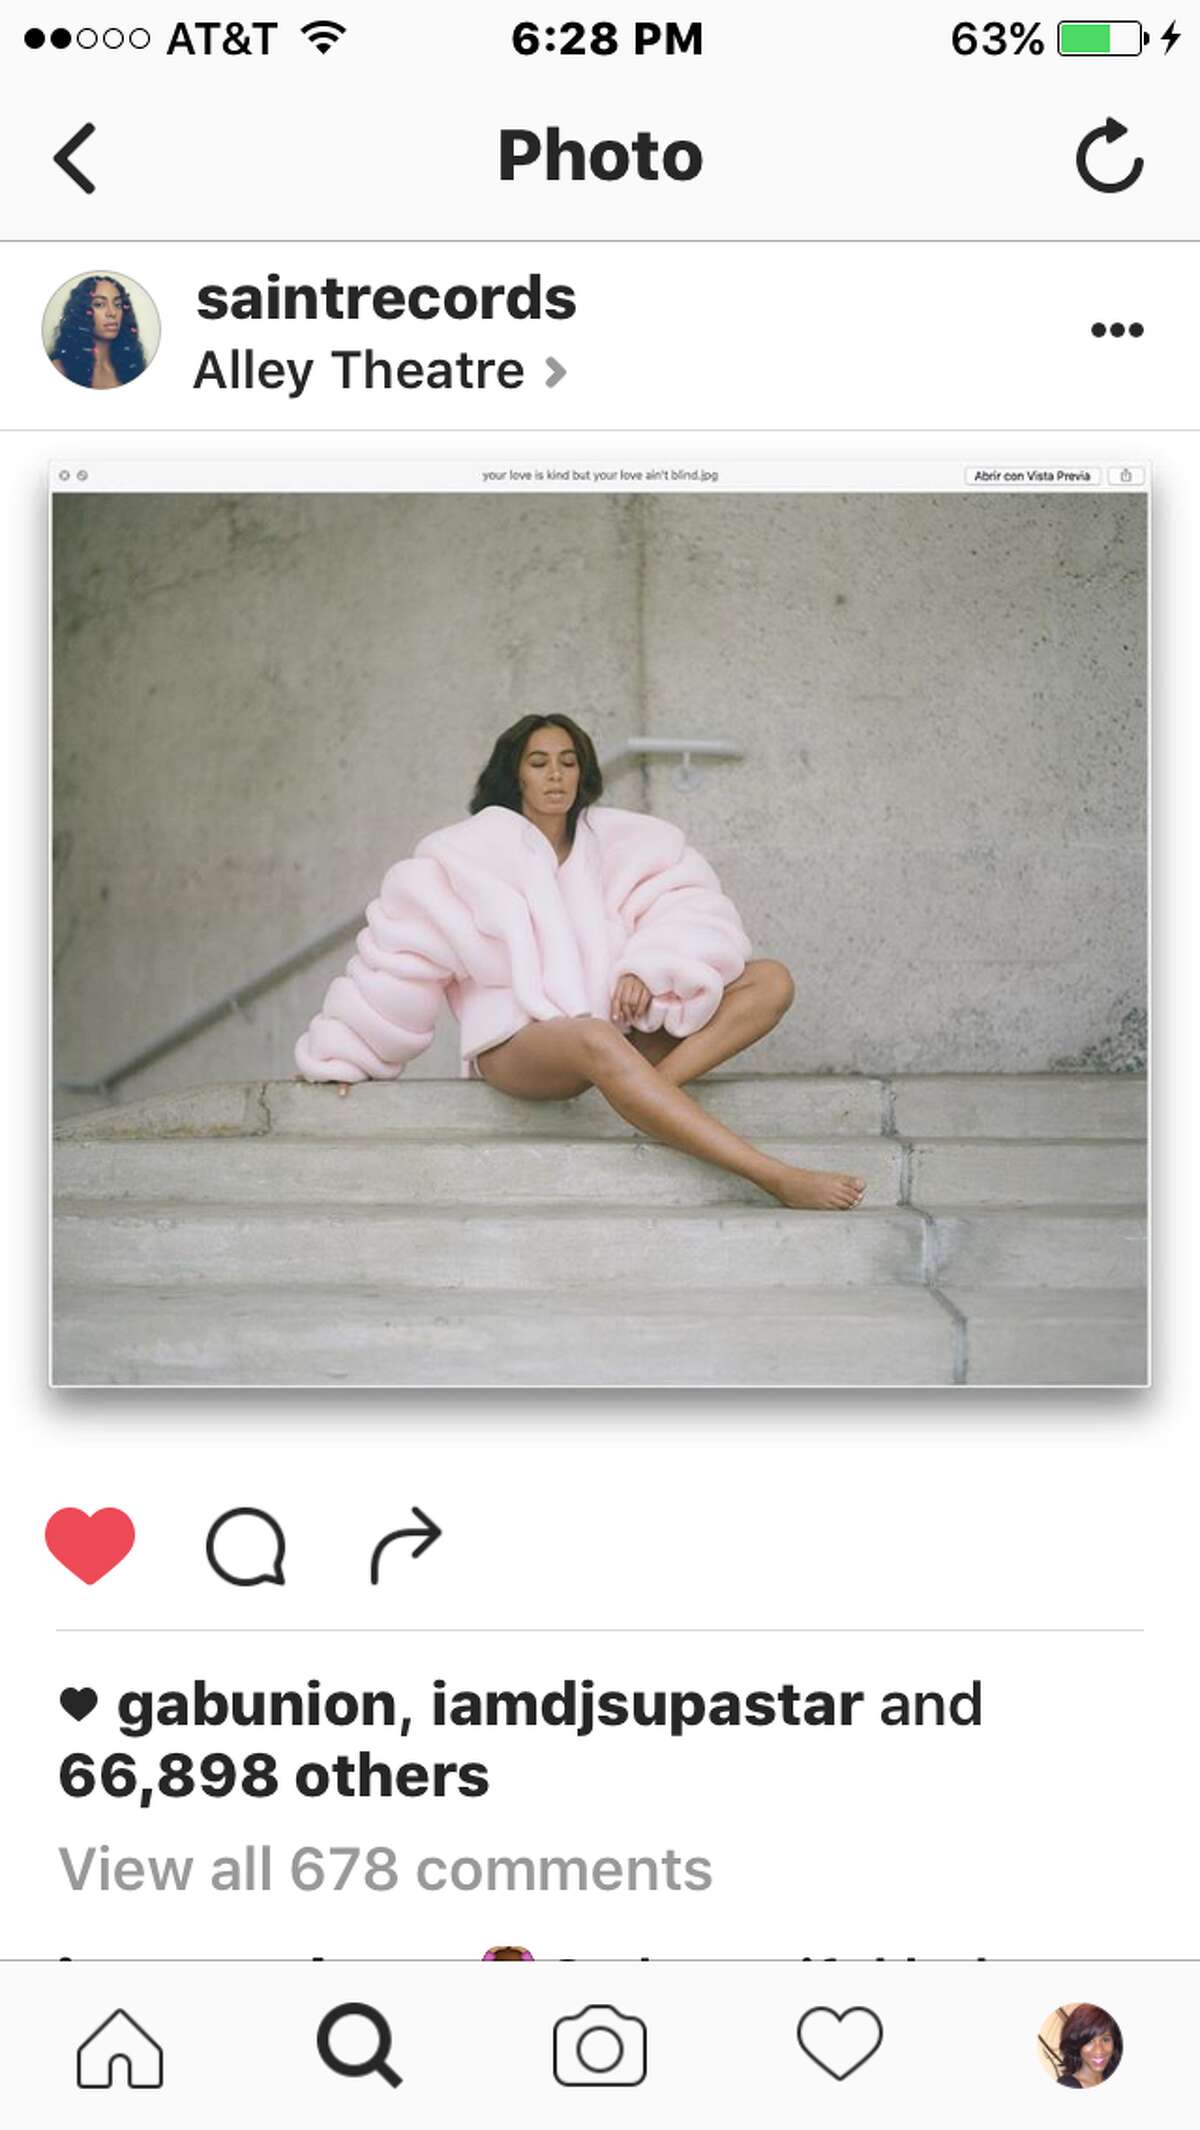 Solange shot her video for "Cranes in the Sky" at the Alley Theatre.